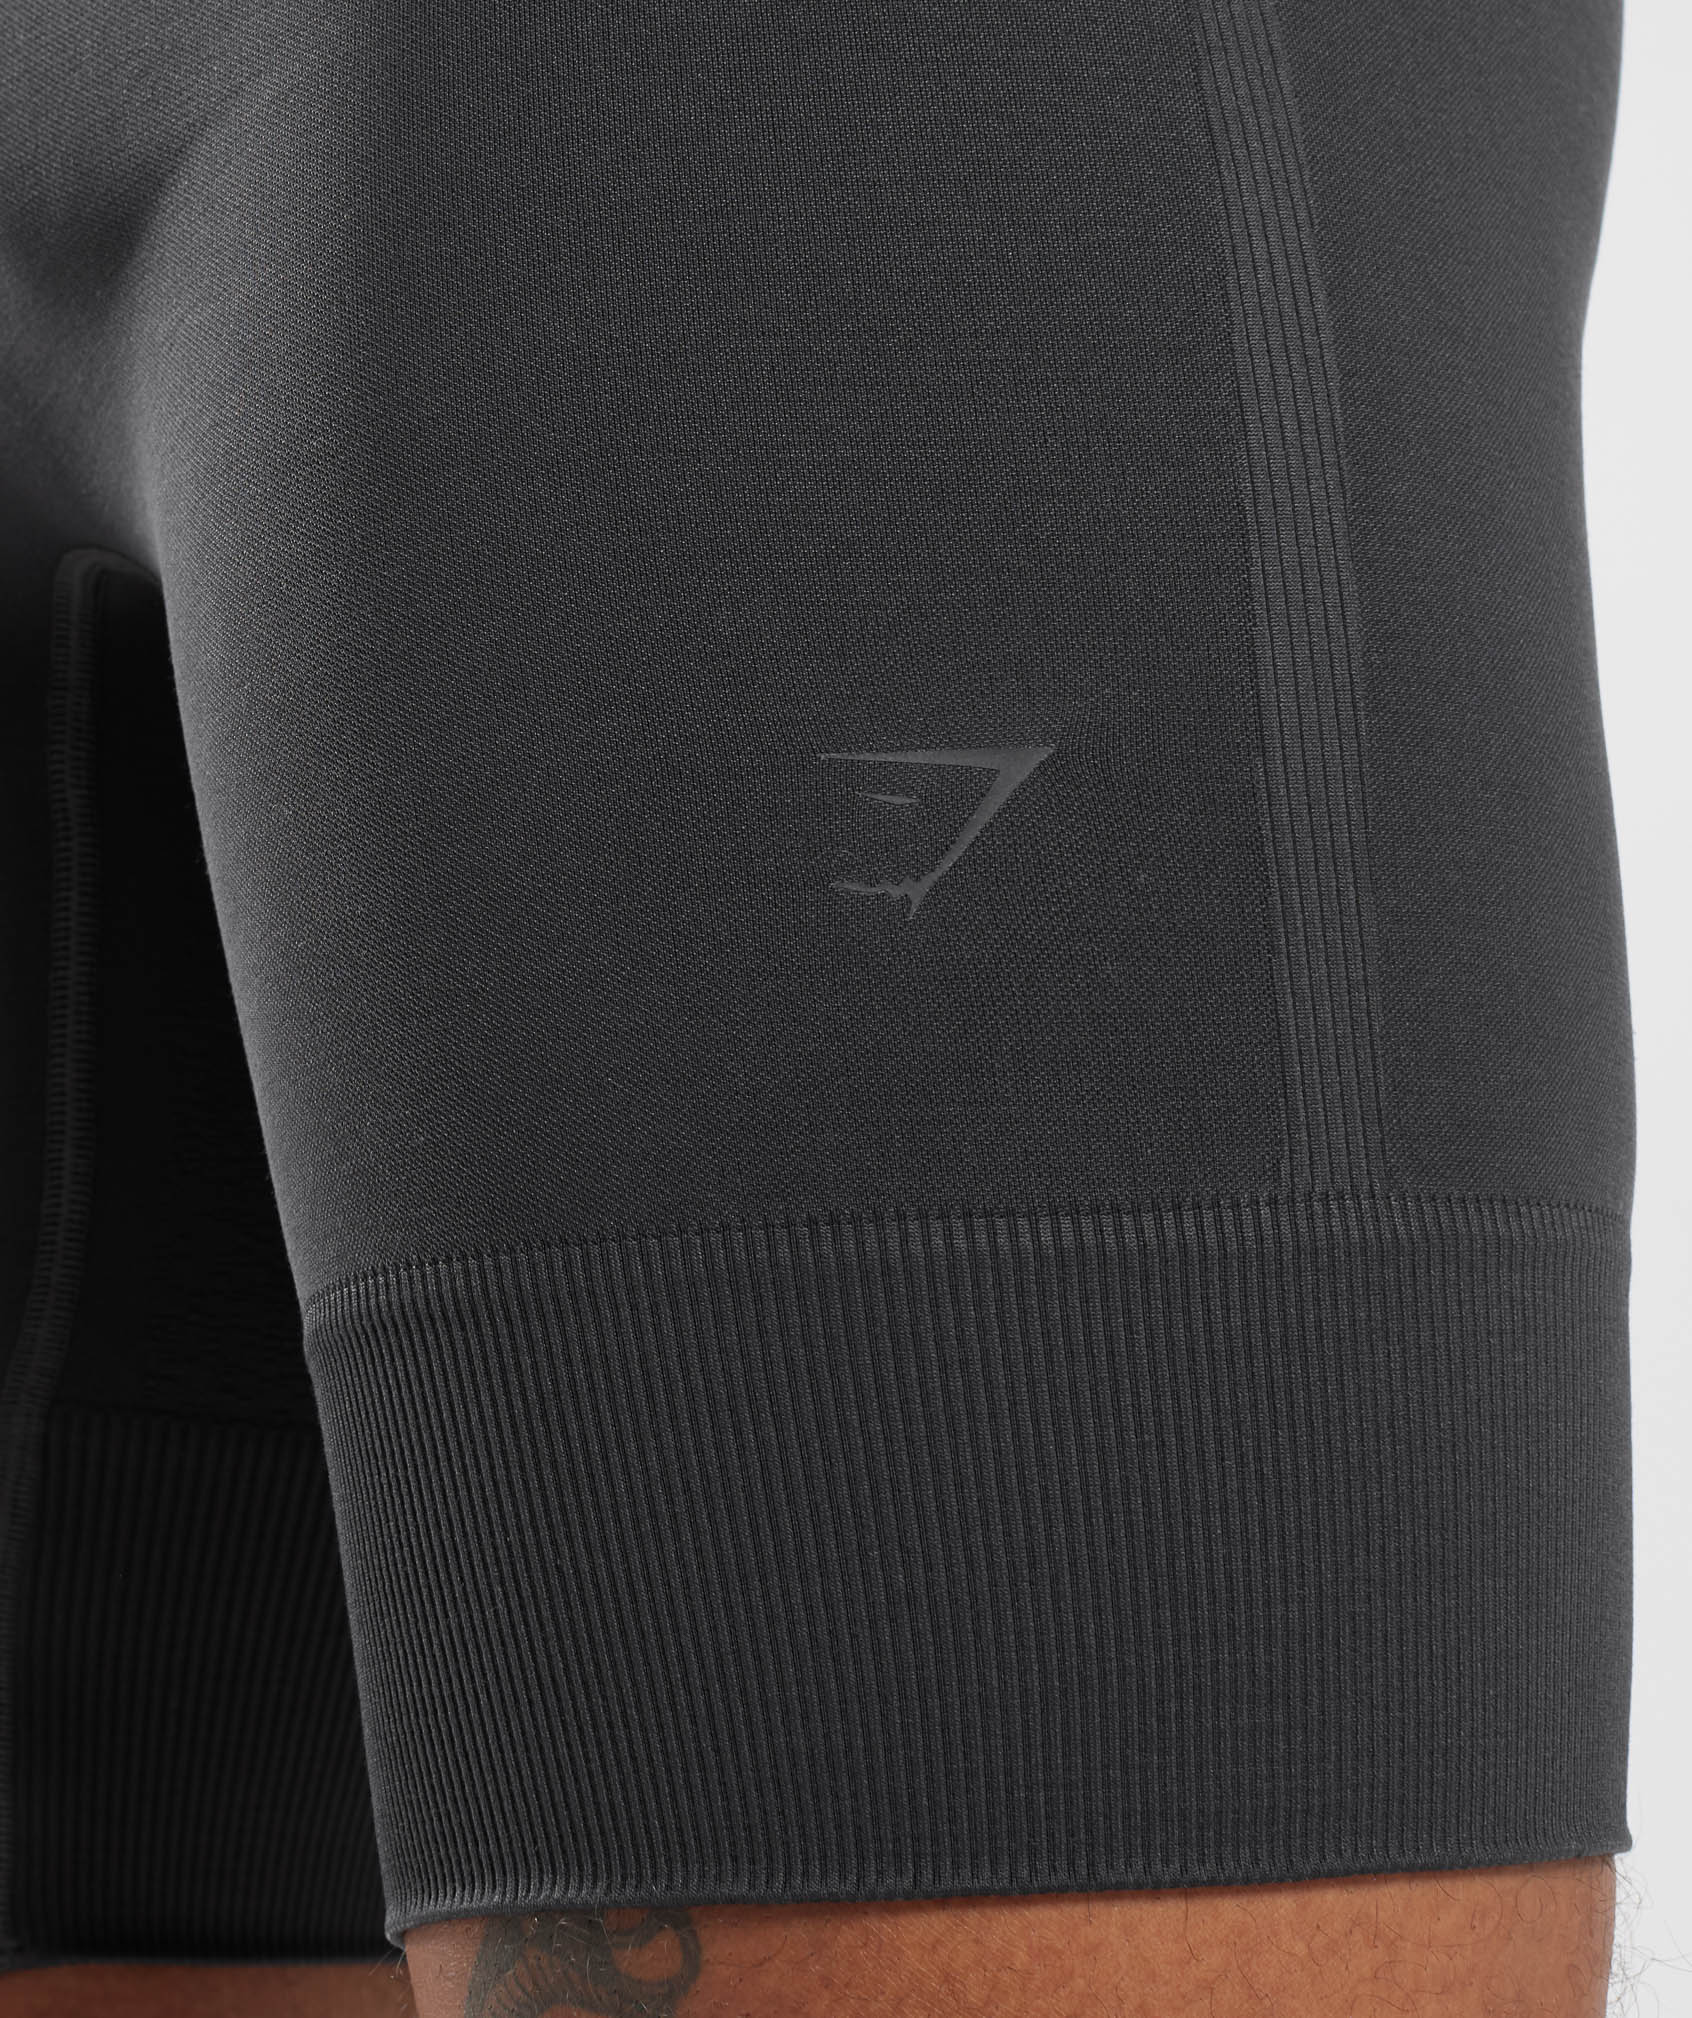 Running Seamless 7" Shorts in Onyx Grey - view 5